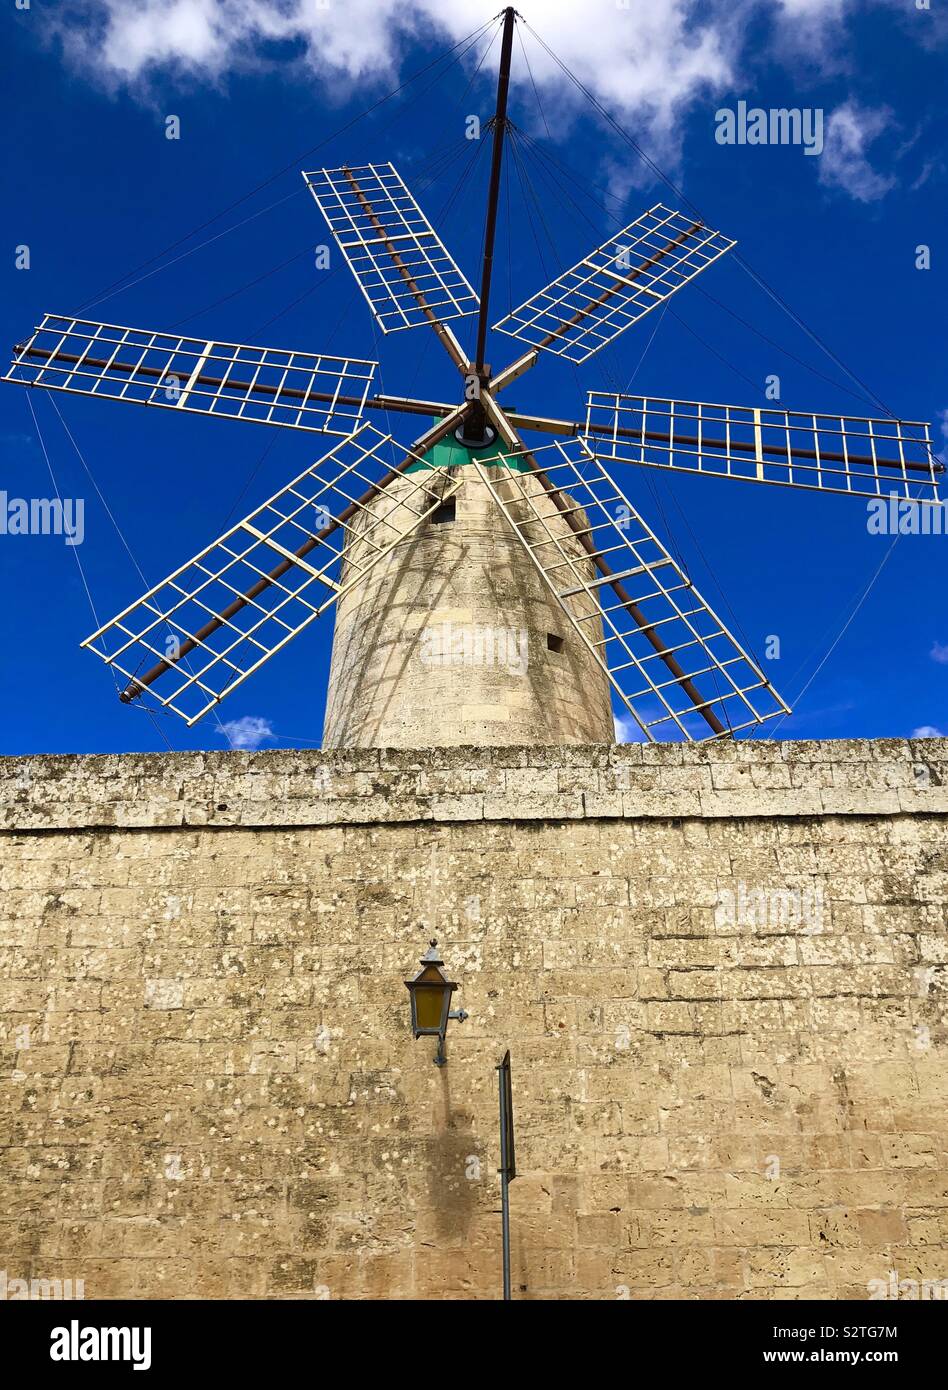 Old windmill against a blue sky Stock Photo